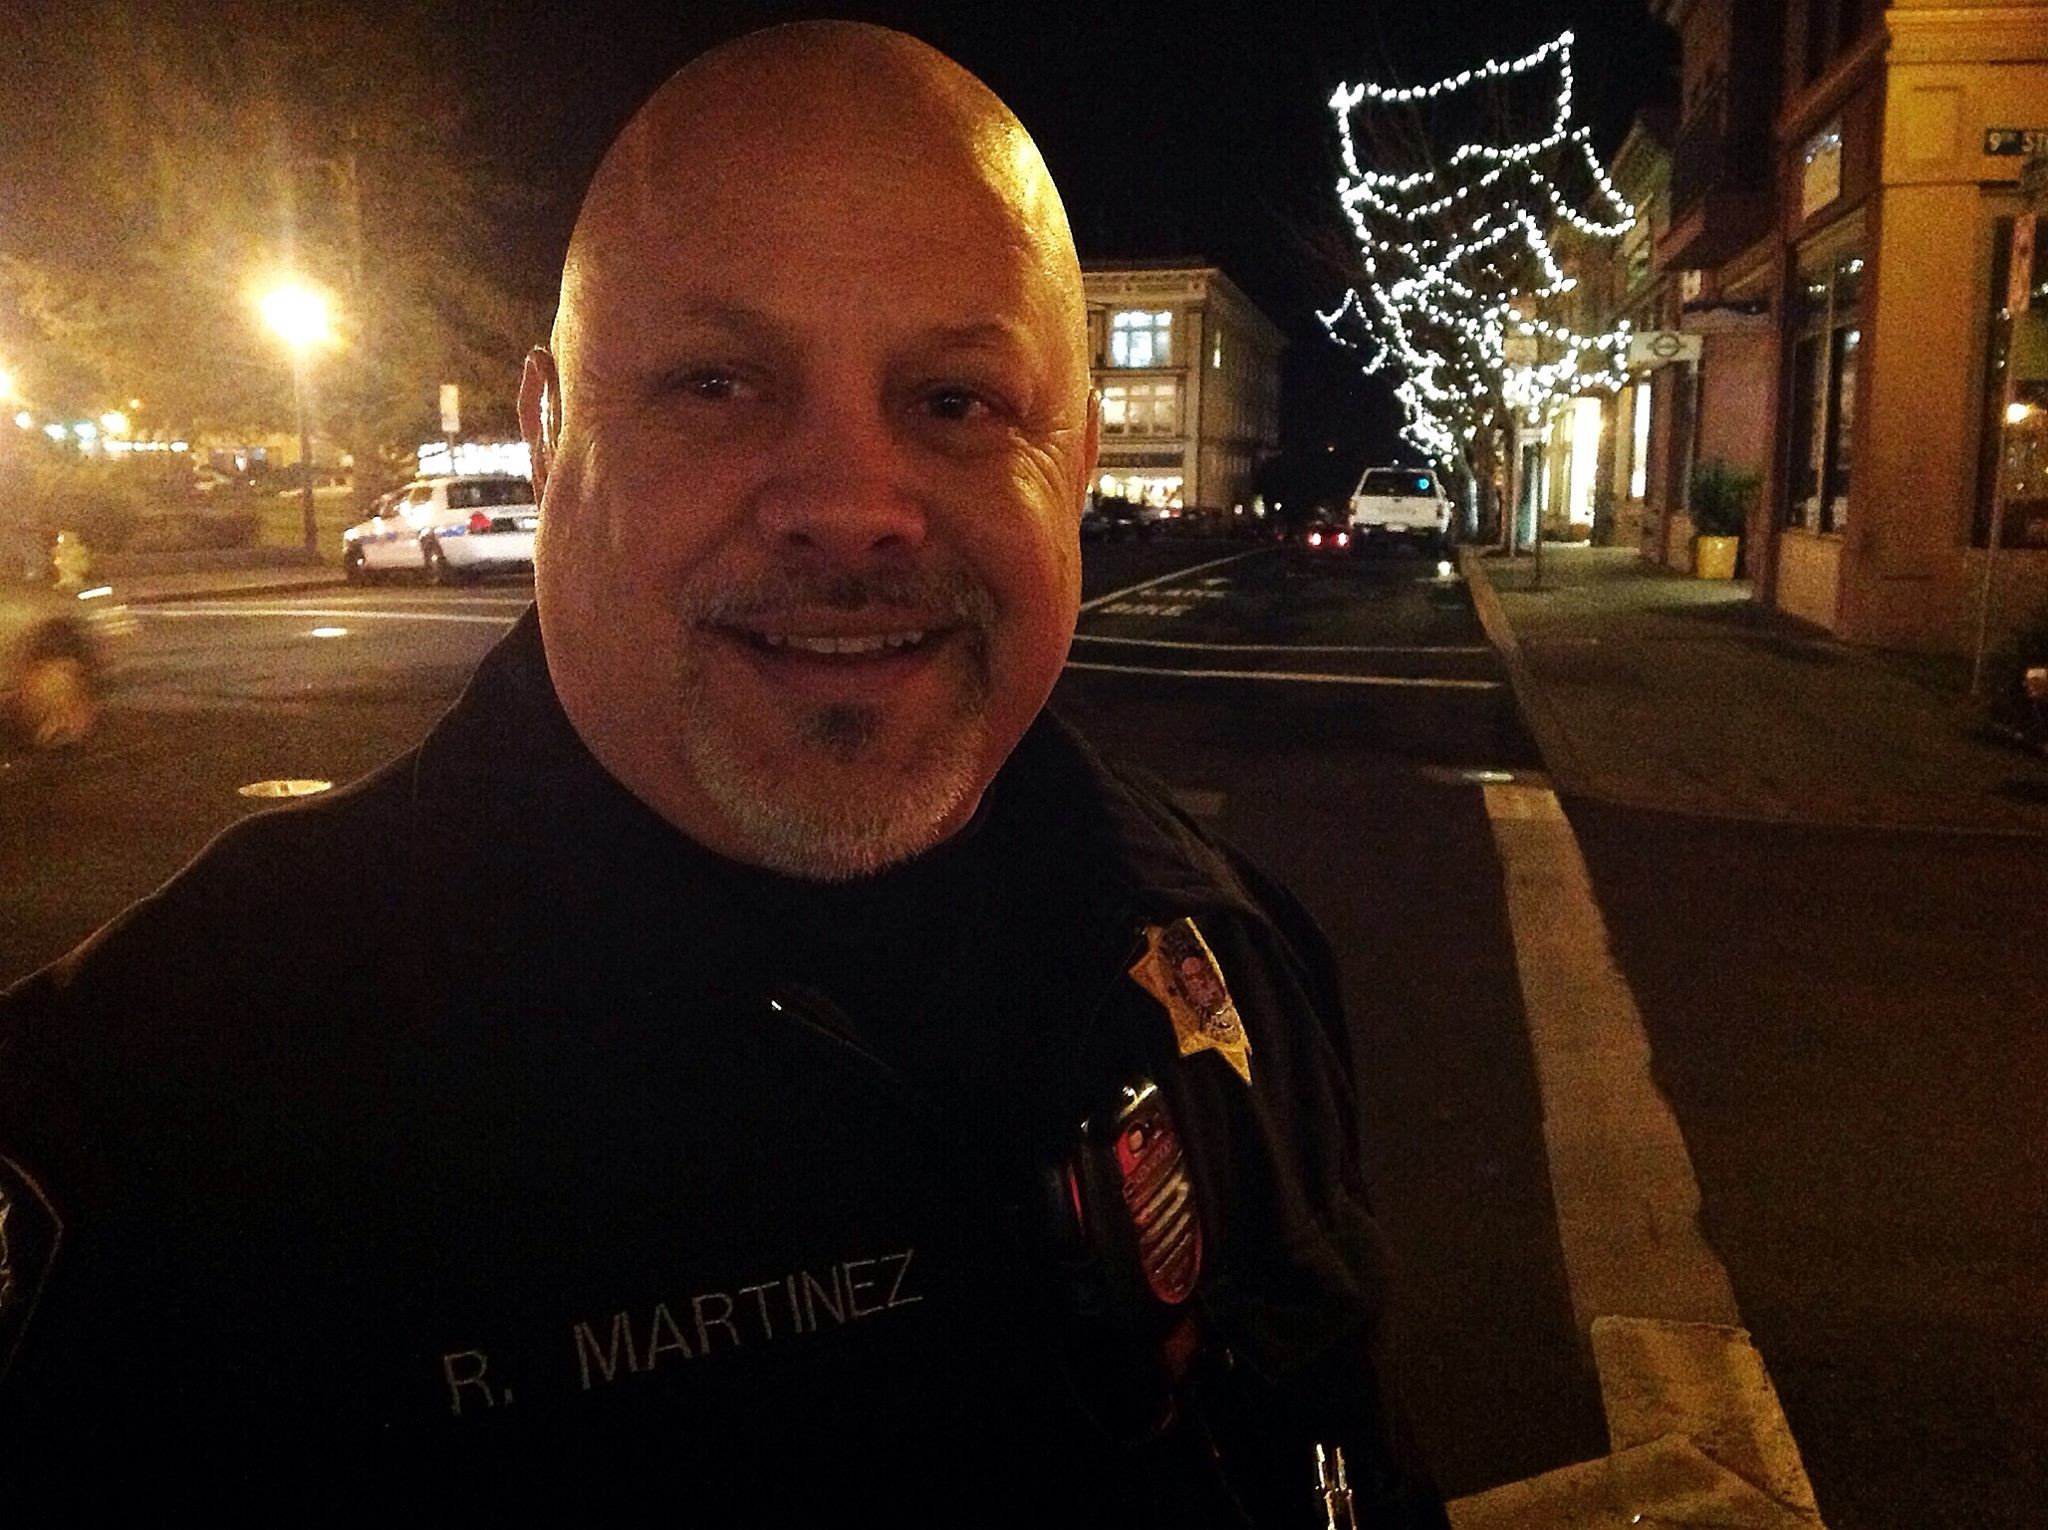 Detective (and Dr. Squid drummer) Bob Martinez patrols the Arcata Plaza and vicinity Friday night, mostly giving warnings to cigarette smokers. - PHOTO BY BOB DORAN